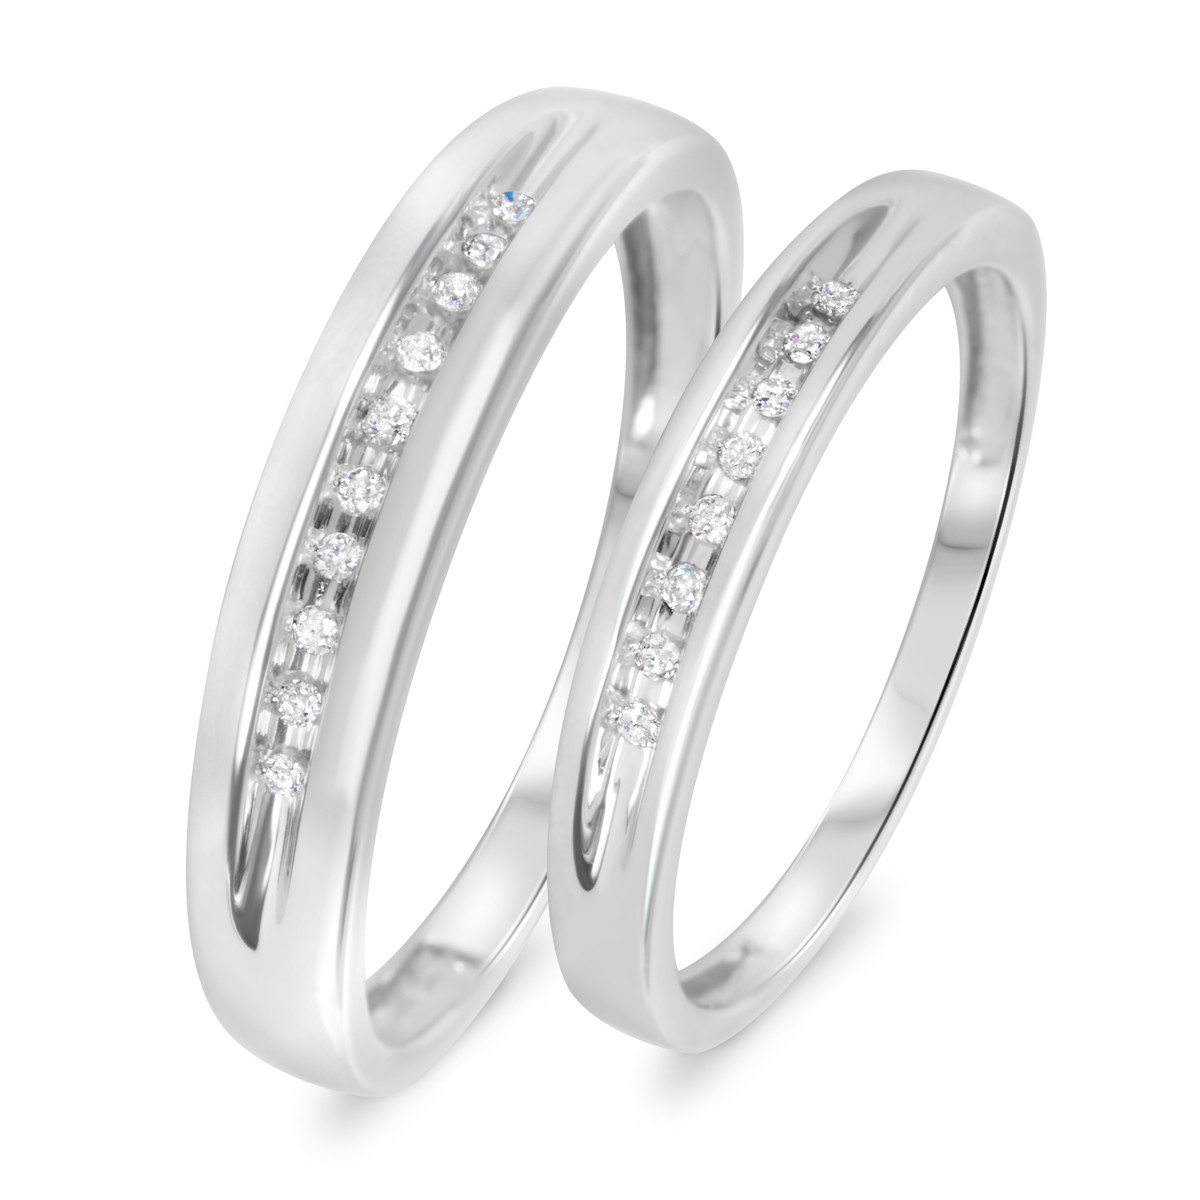 White Gold Wedding Rings For Her
 1 10 Carat T W Diamond His And Hers Wedding Rings 10K